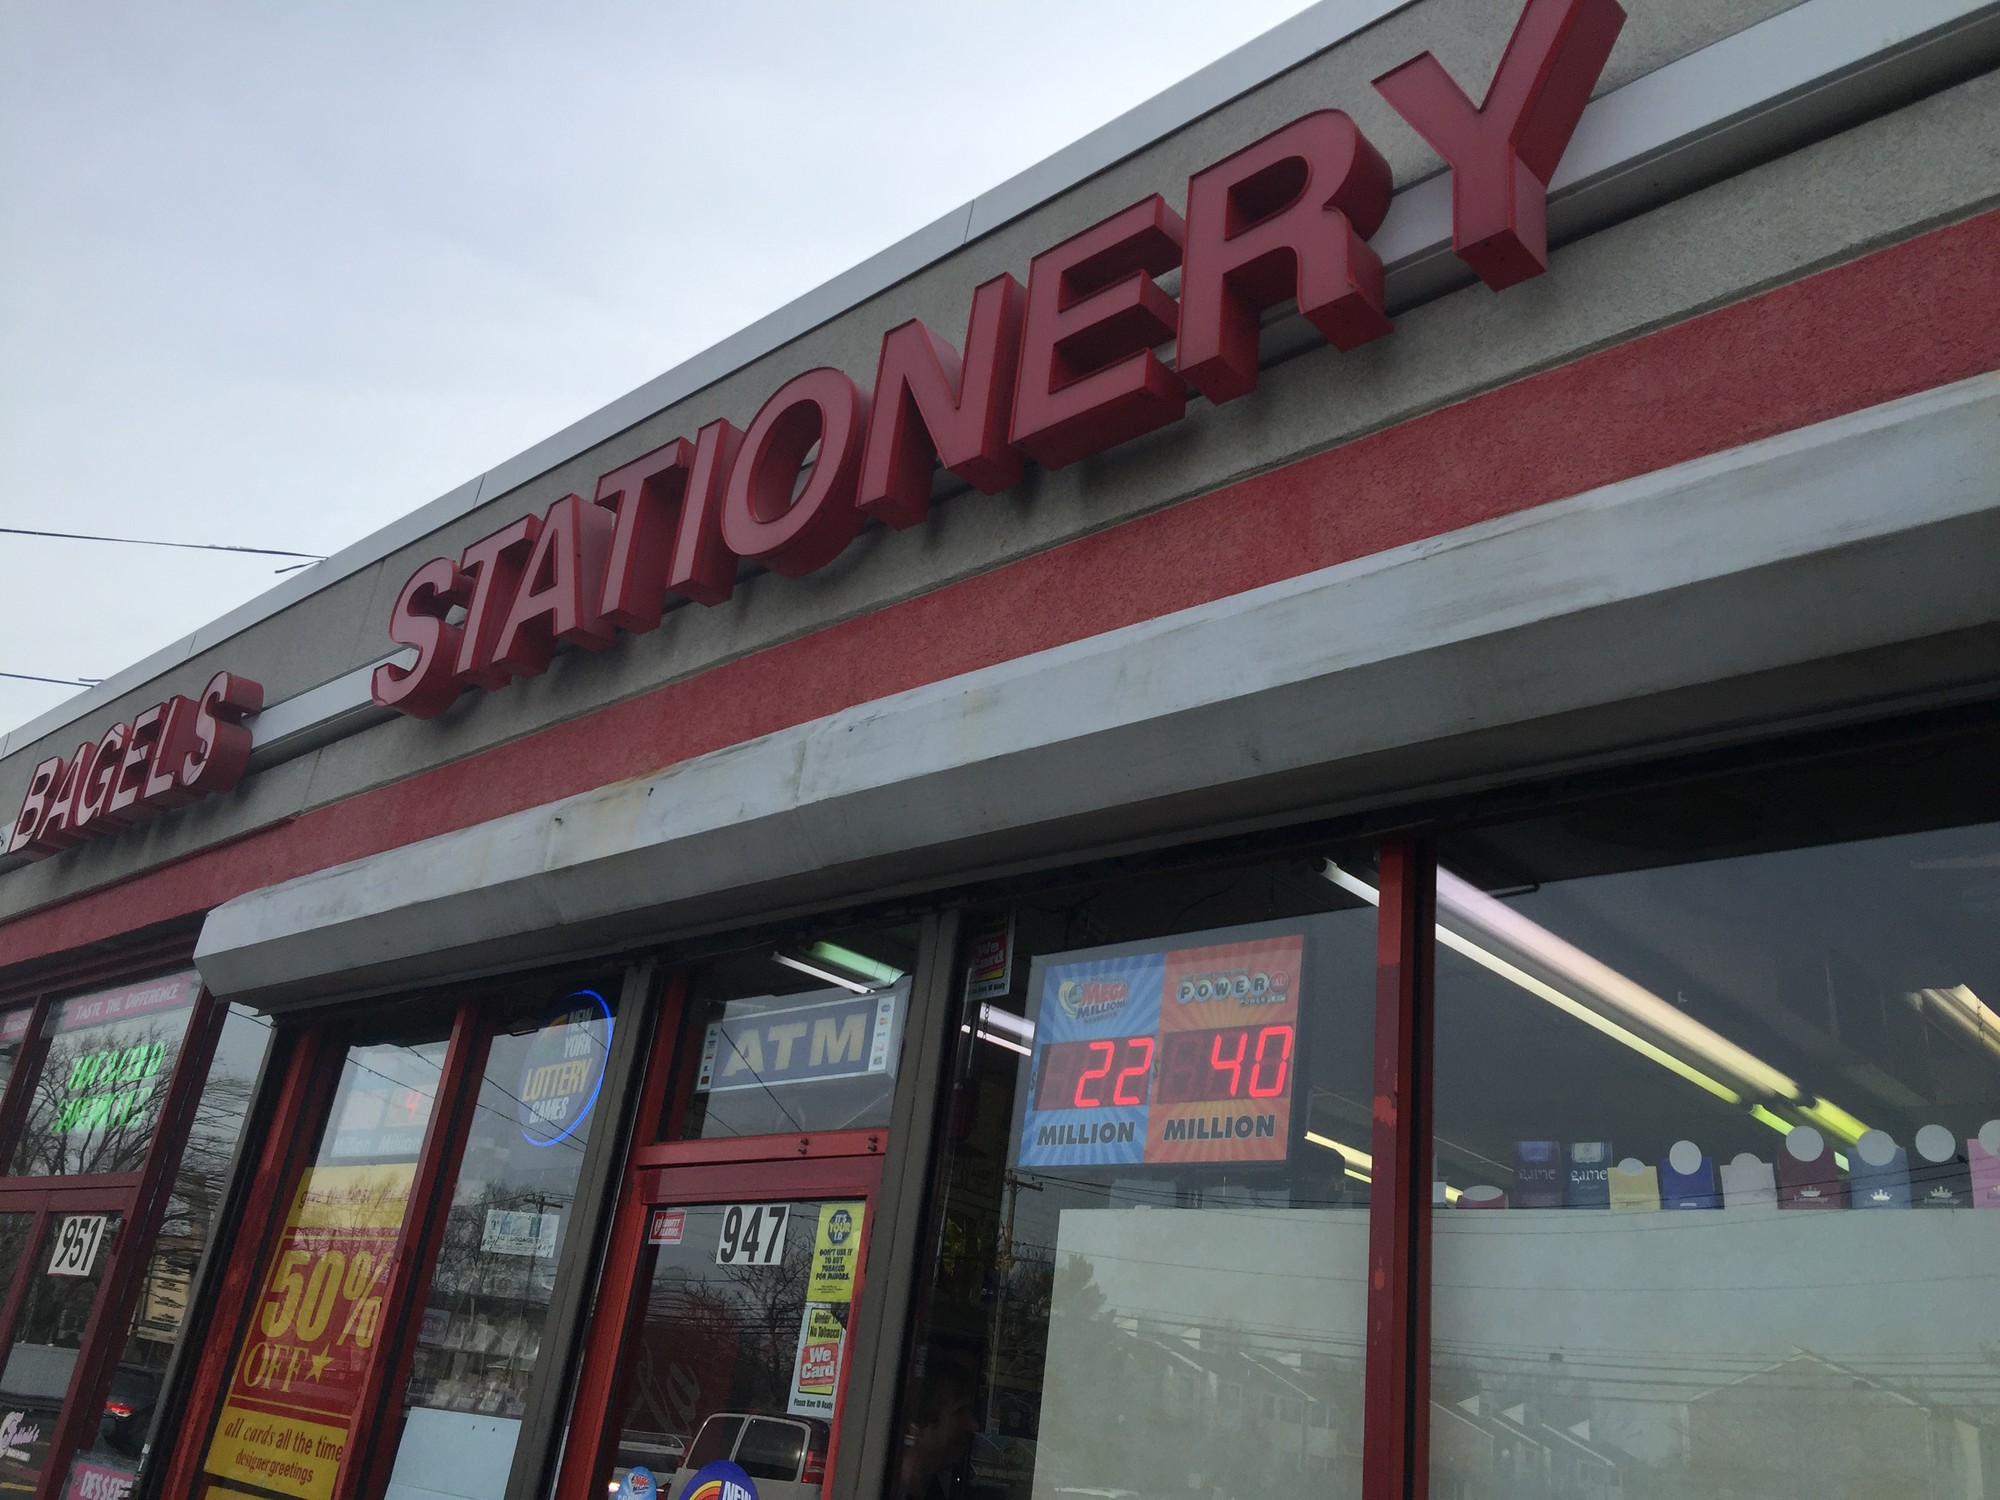 Rosedale stationary in Valley Stream had a $50,000 Powerball winner.